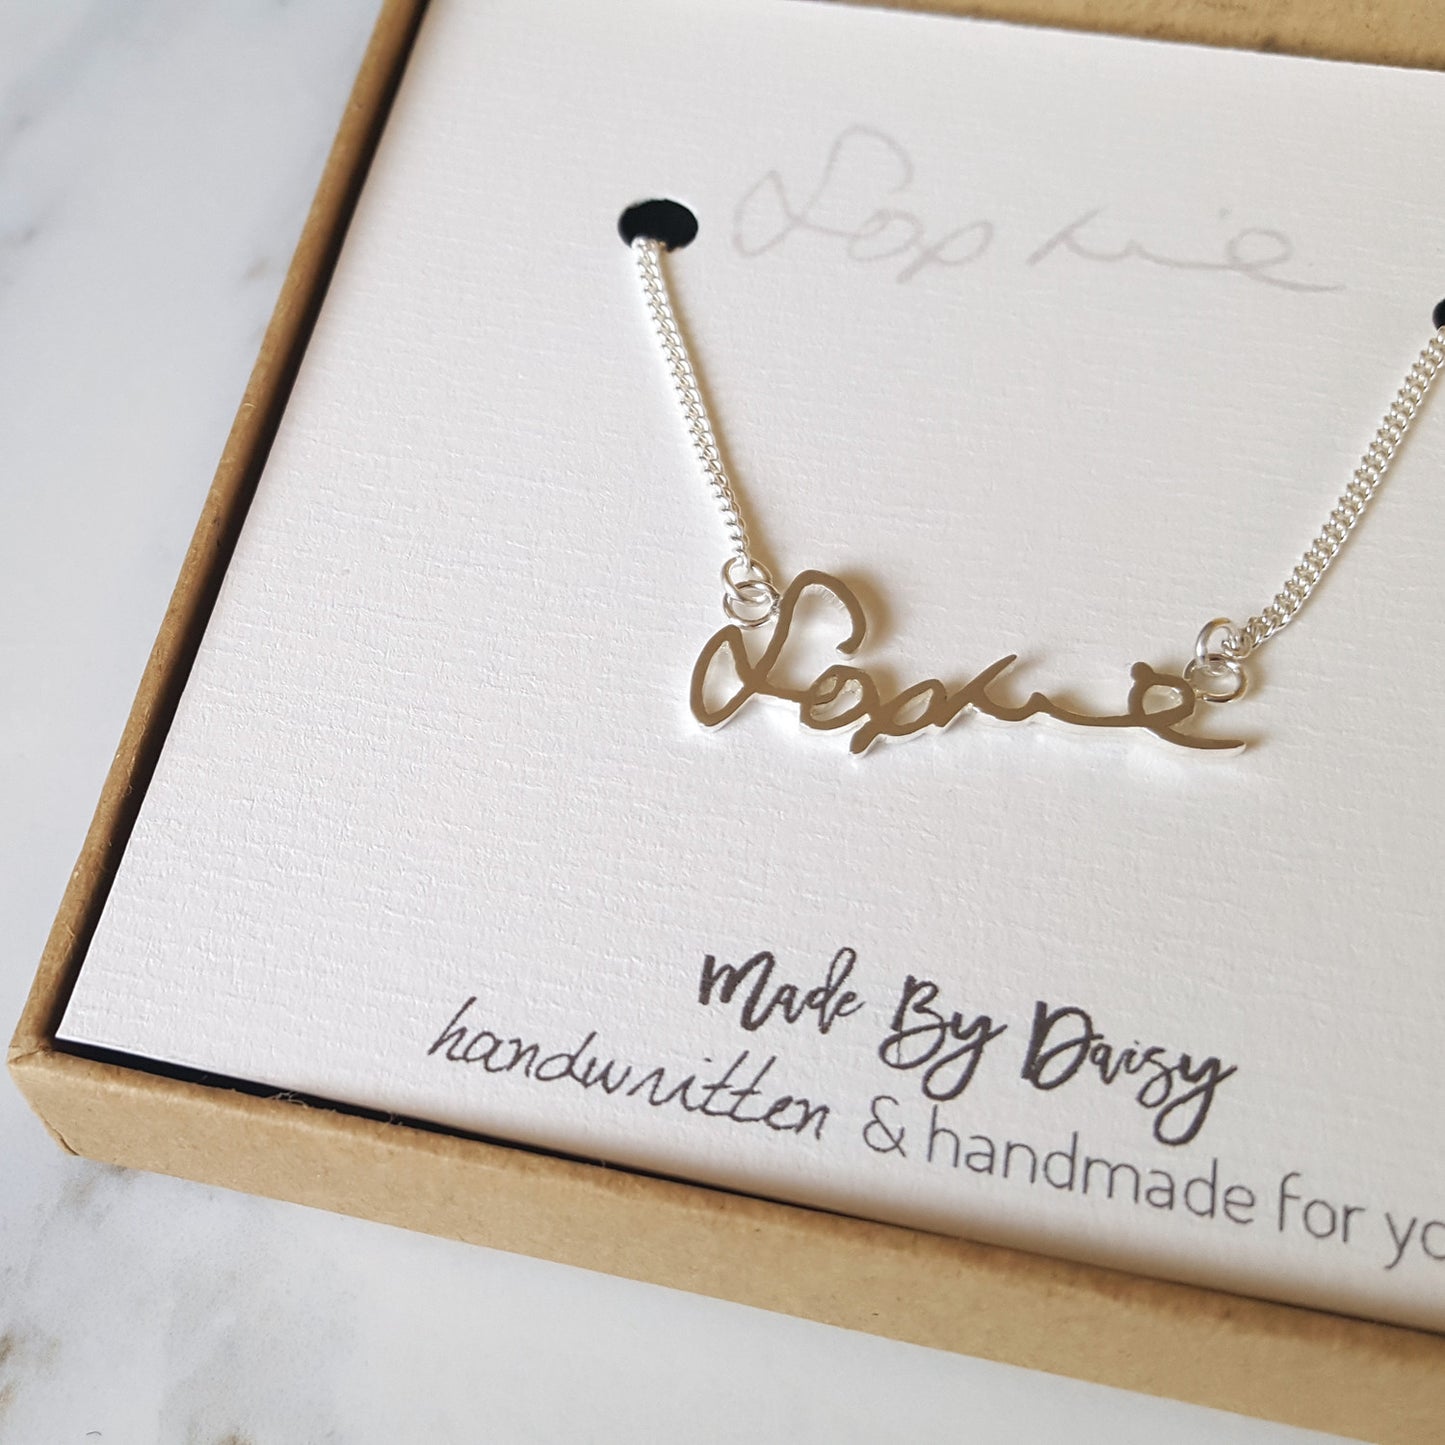 Memorial necklace in your loved one's handwriting